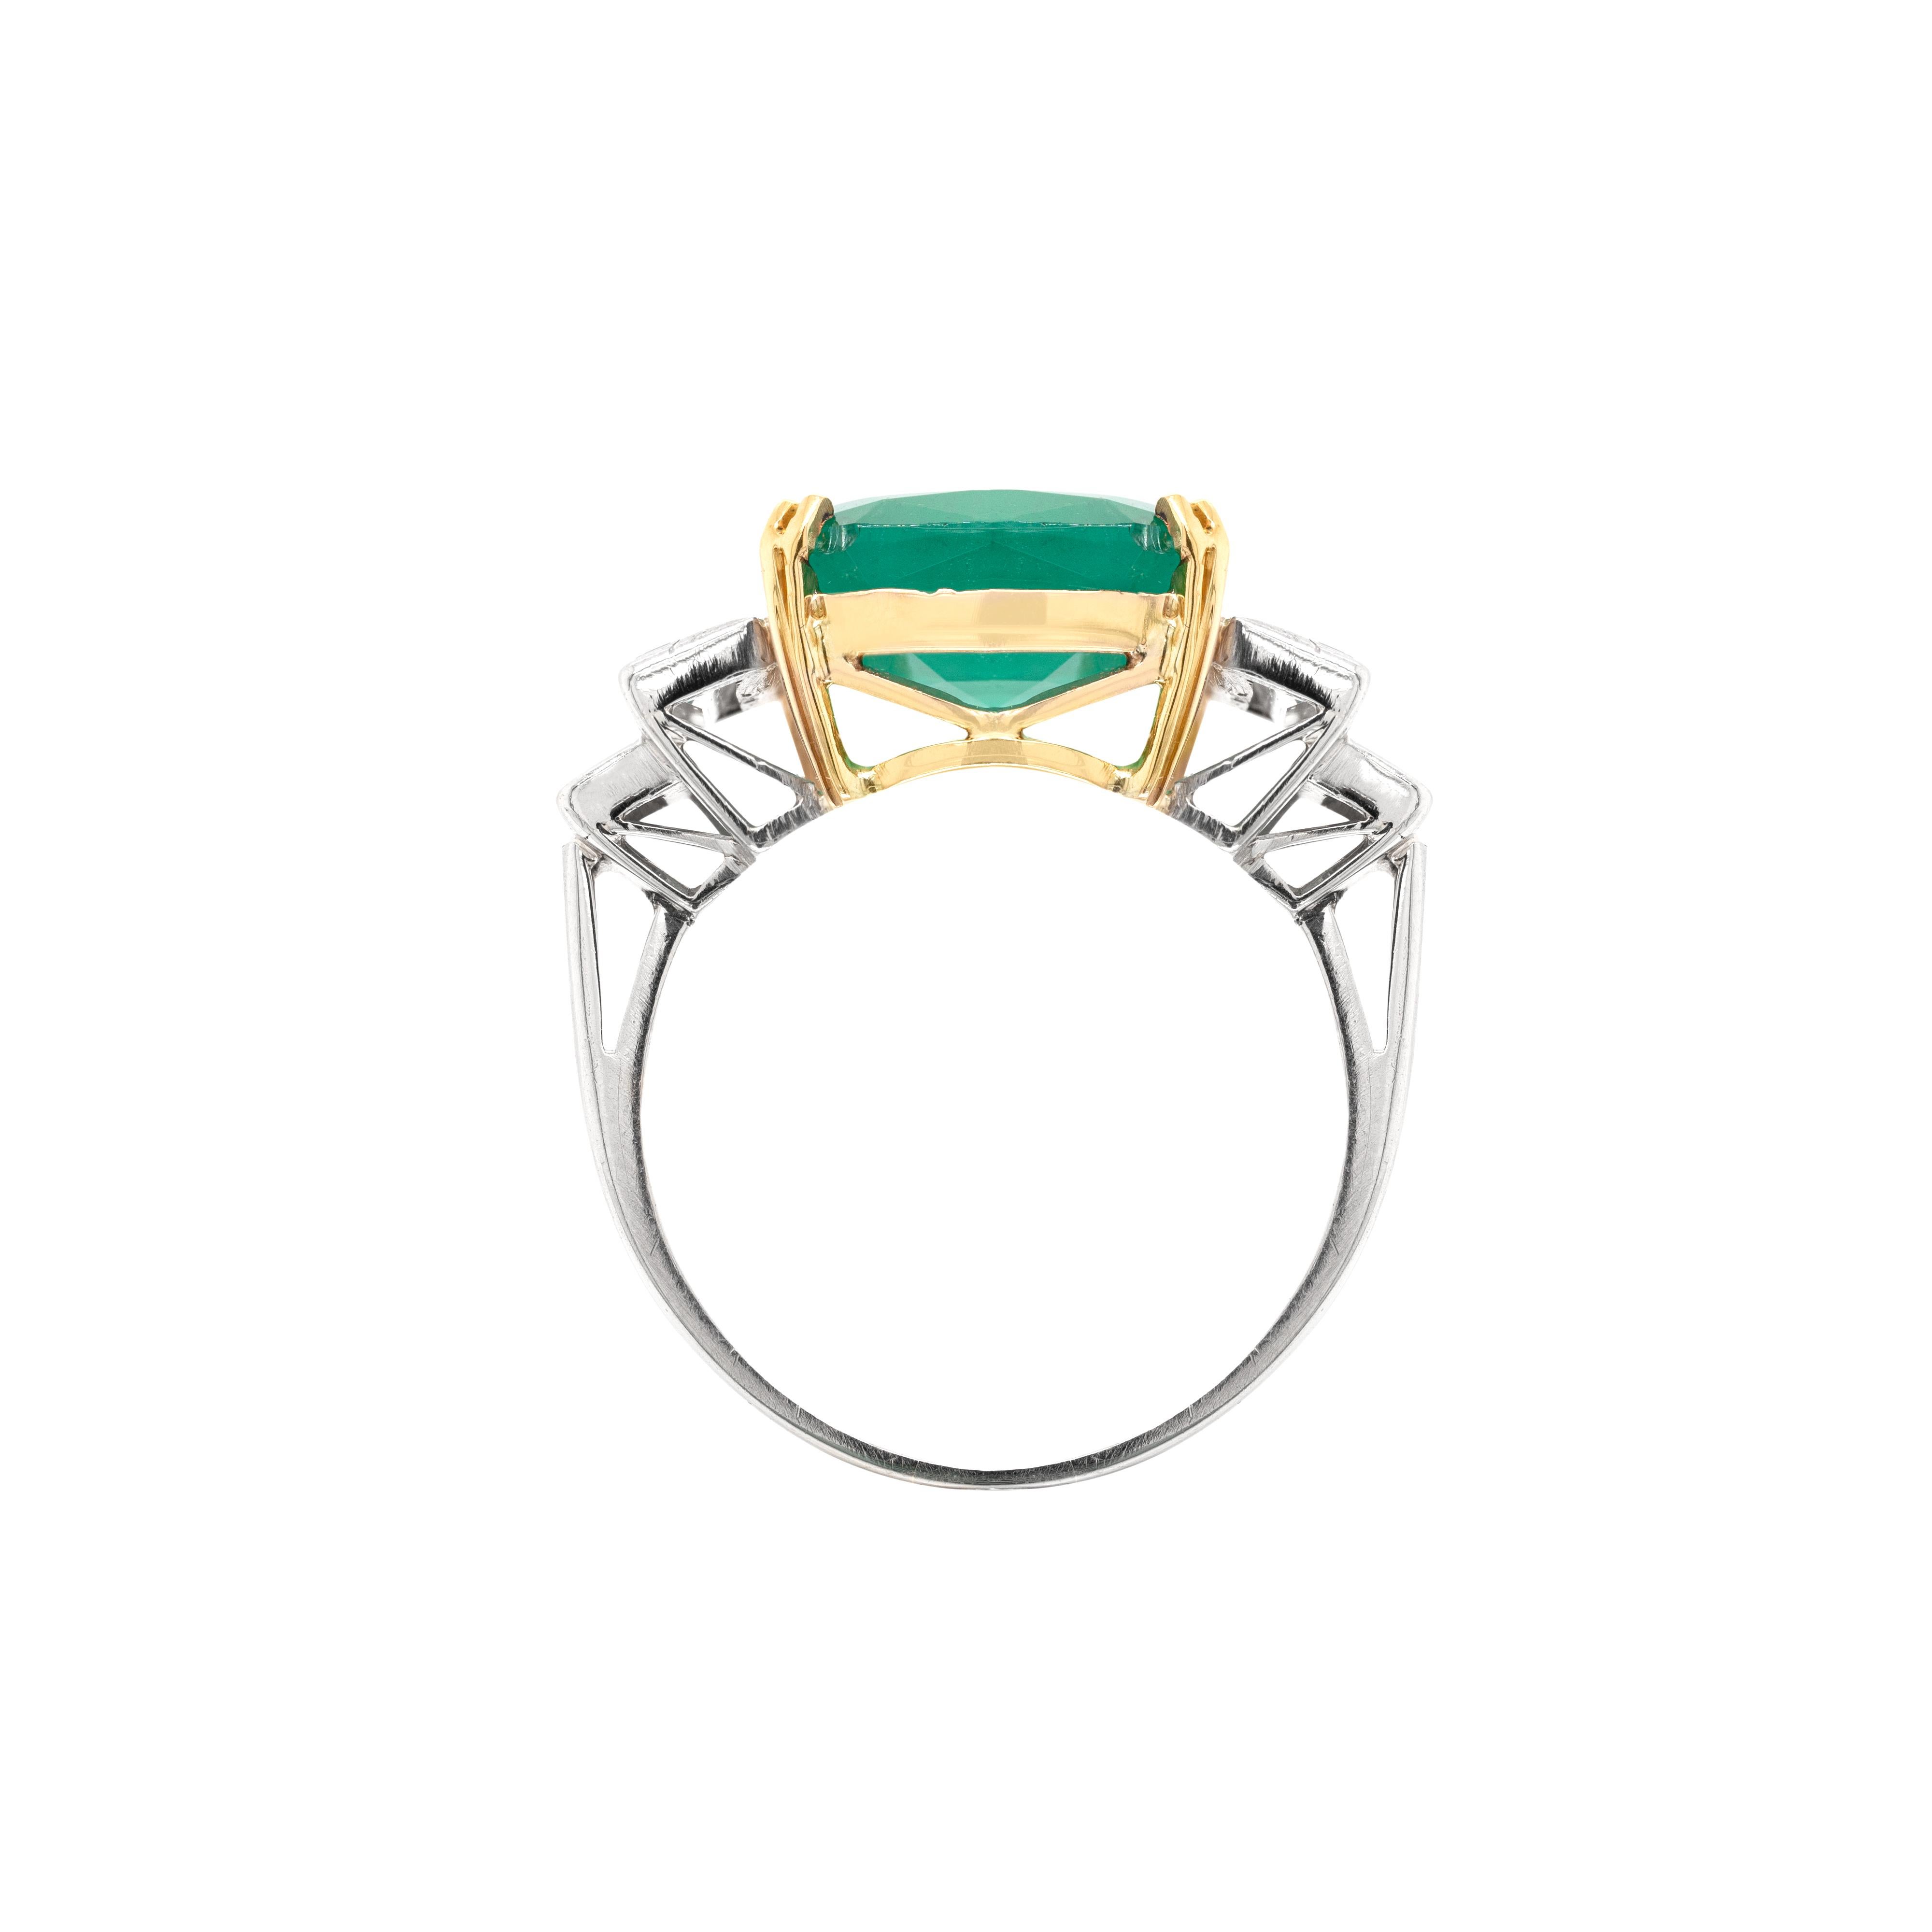 This wonderful engagement ring features an impressive 5.94ct cushion cut emerald mounted in a four double claw 18 carat yellow gold collet. The emerald is beautifully accompanied by two baguette cut diamond steps on either side with an approximate